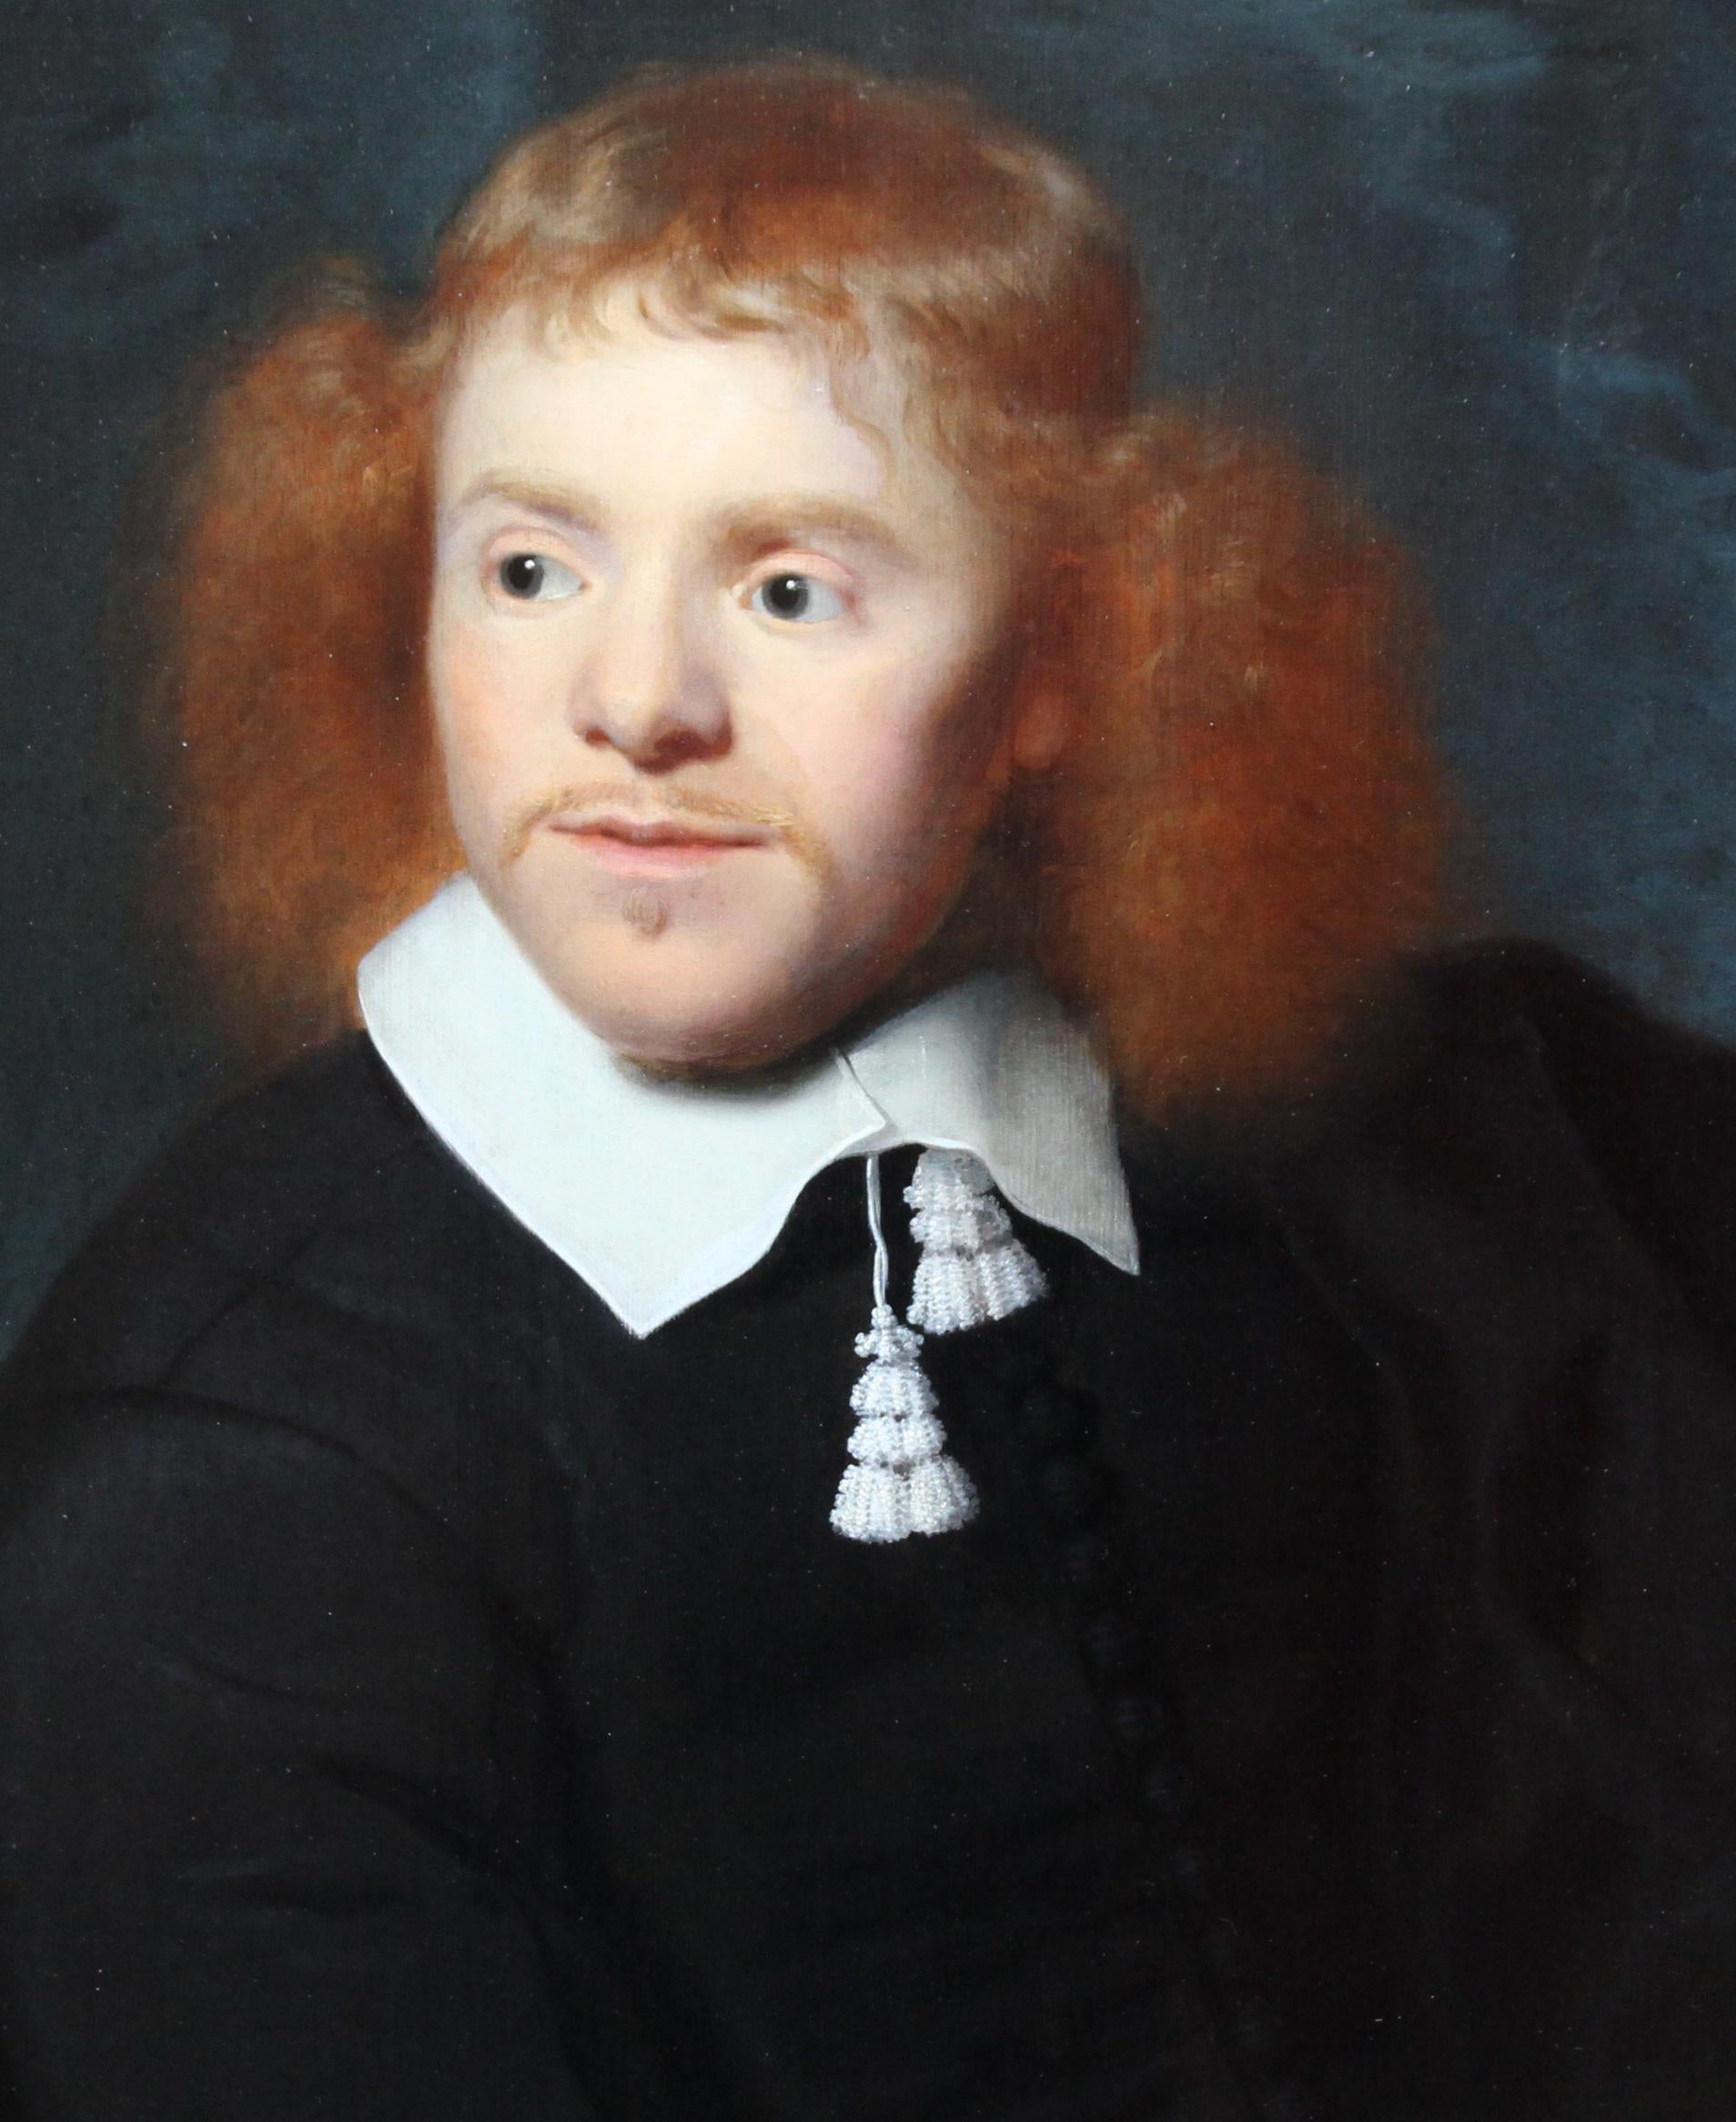 This incredible 17th century portrait oil painting is by Dutch Golden Age artist Simon Luttichuys or Simon Littlehouse as he was also known. Painted in oil on panel circa 1650 the young gentleman appears to be wearing a Puritan or Pilgrim type